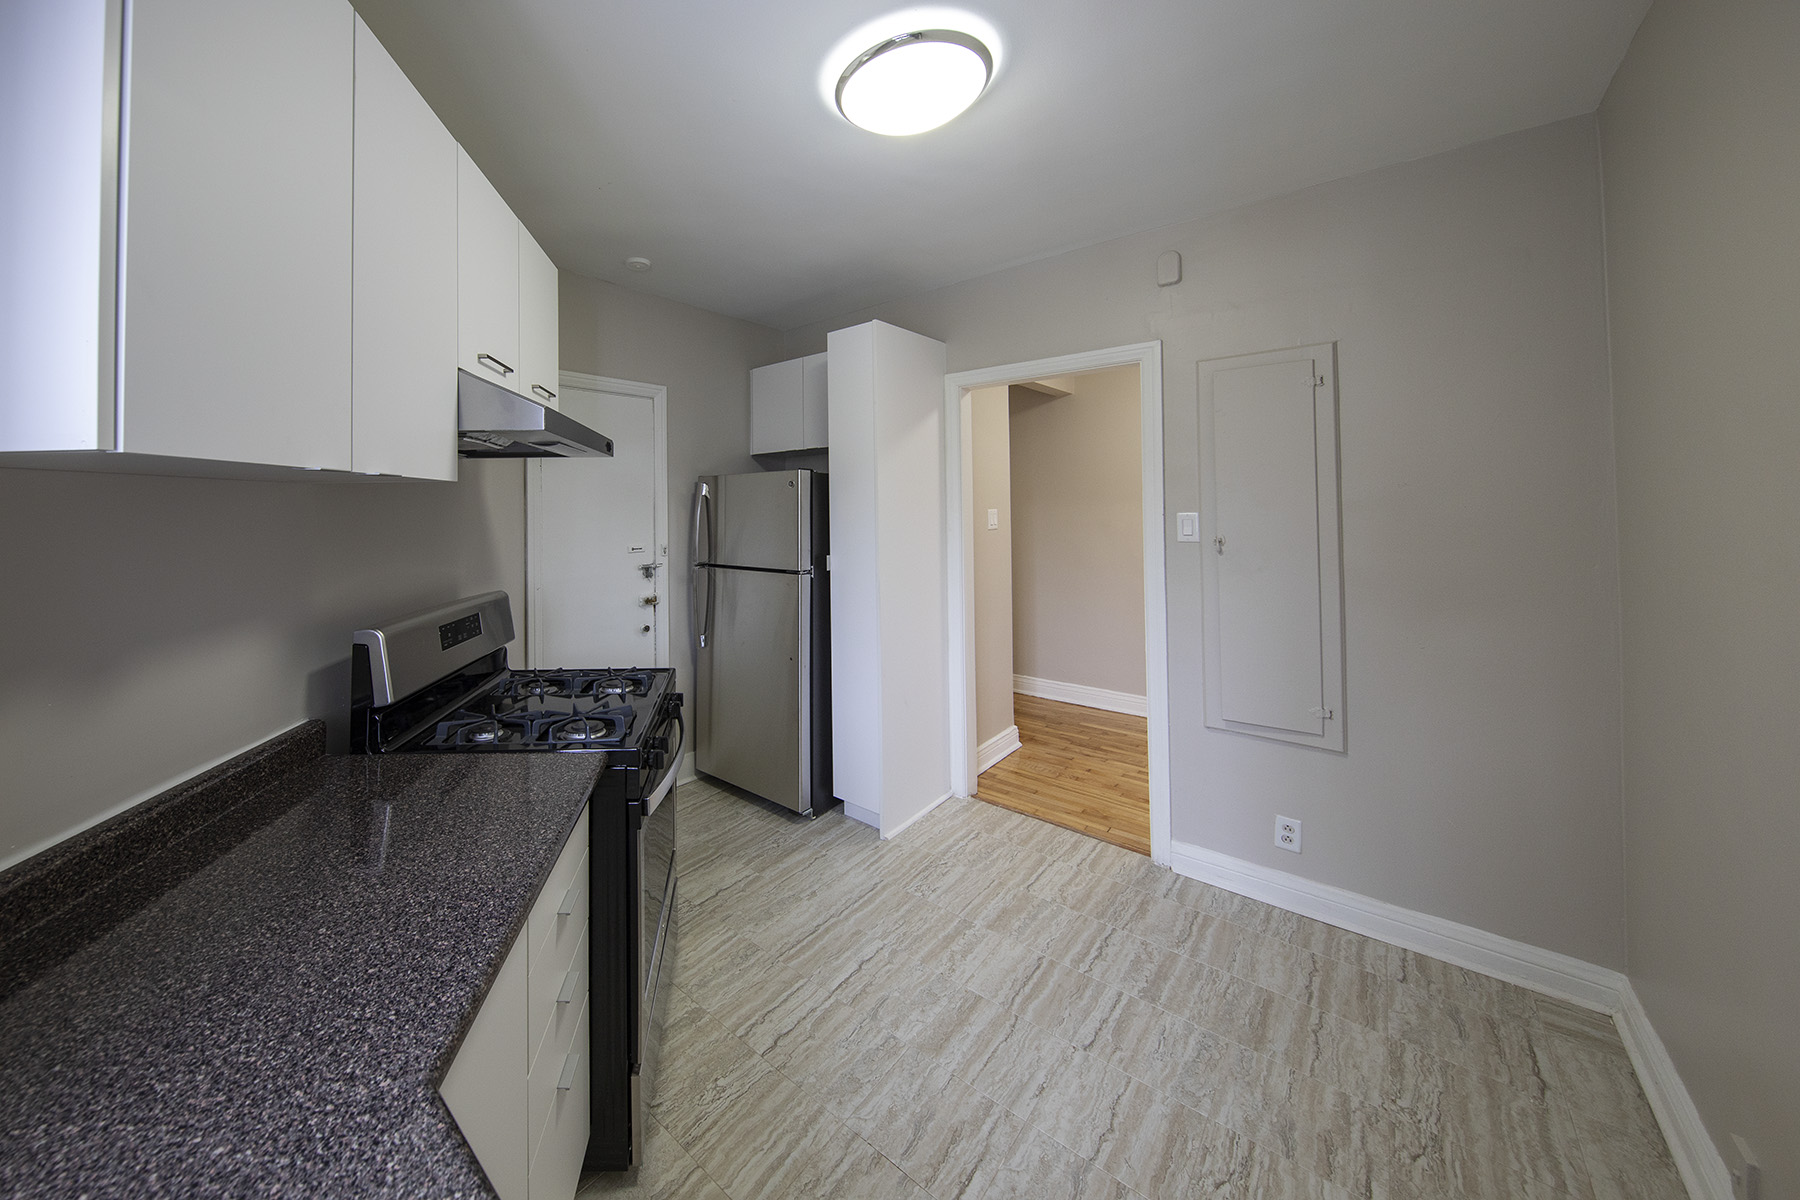 2 bedroom Apartments for rent in Notre-Dame-de-Grace at 6325 Somerled - Photo 11 - RentQuebecApartments – L401540